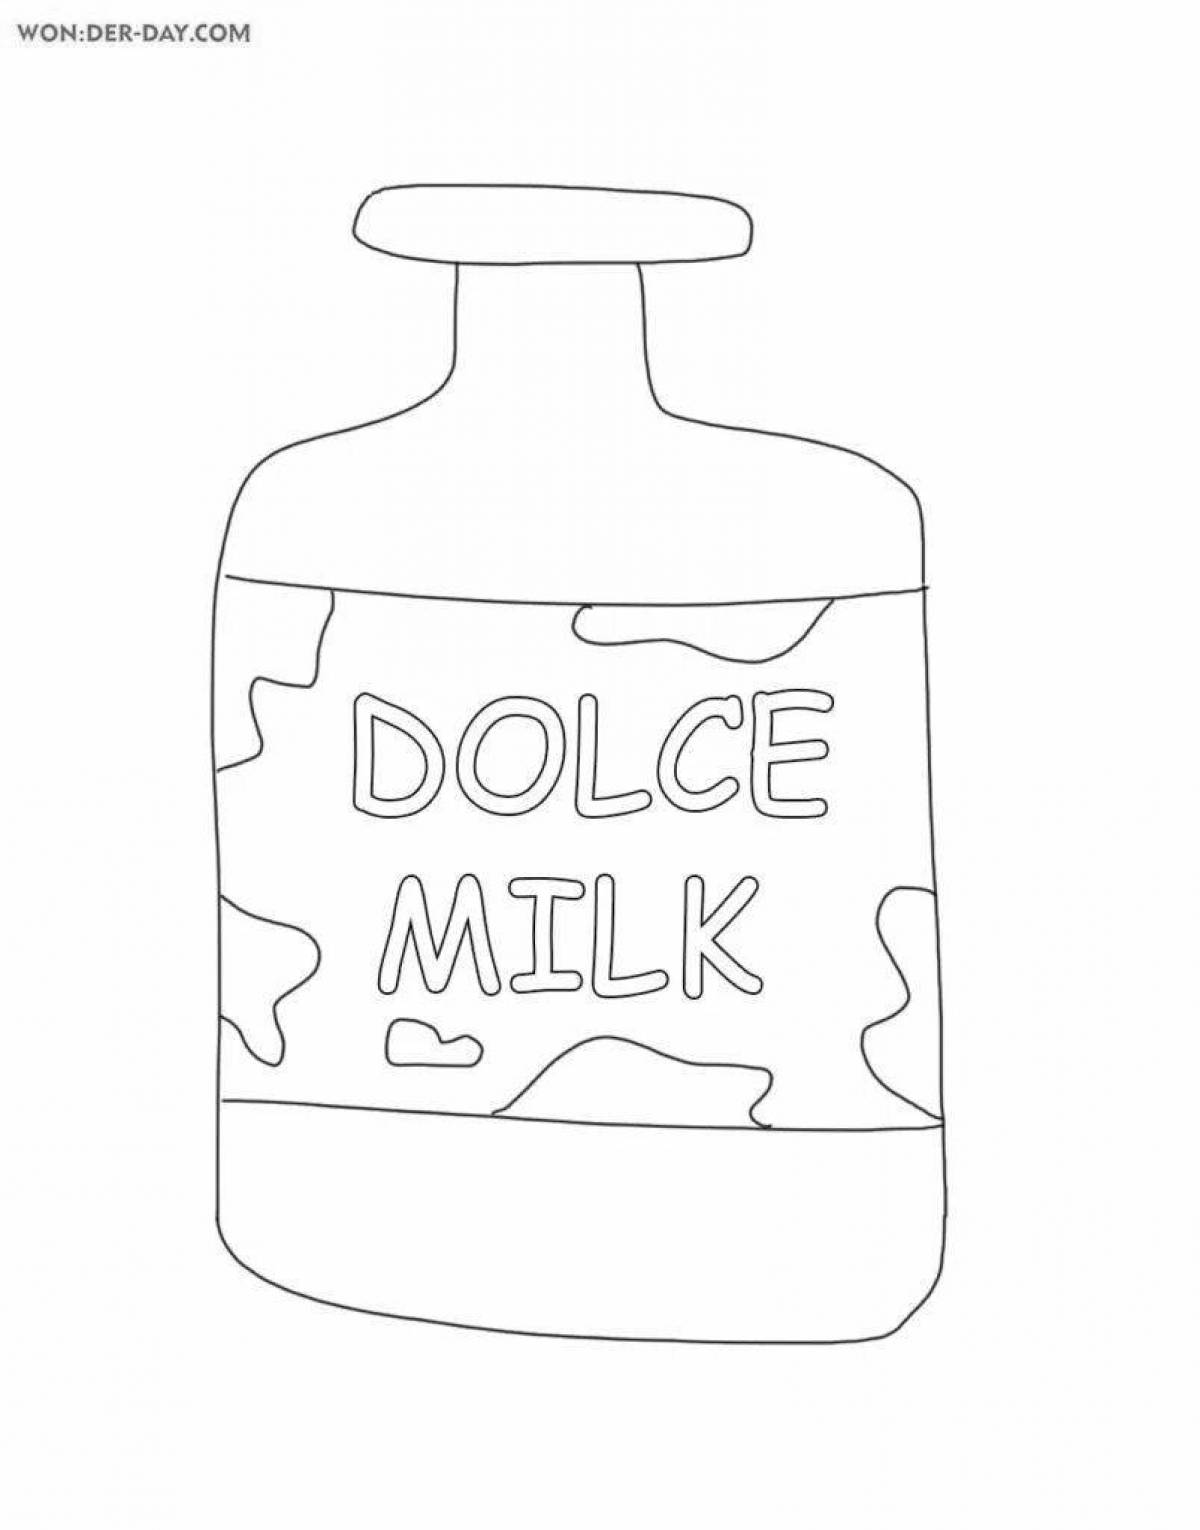 Coloring live milk cosmetics dolce